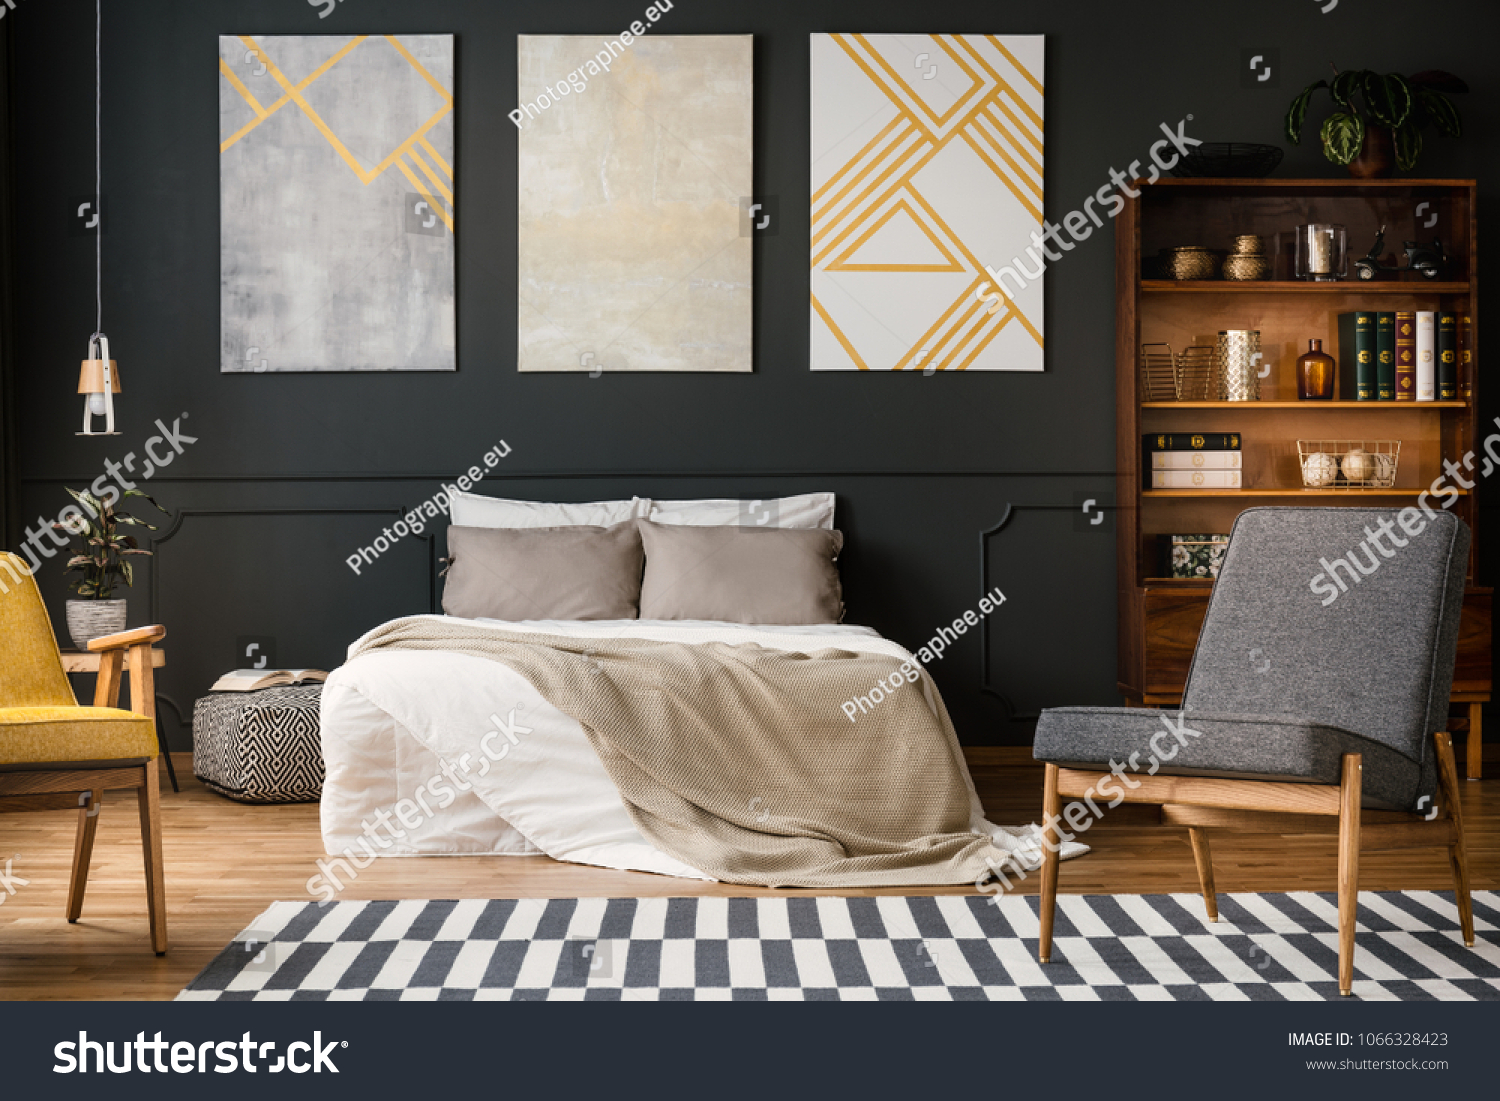 Modern bedroom interior with big bed, grey and white carpet, chairs, paintings, lamp and bookcase with books and decorations #1066328423